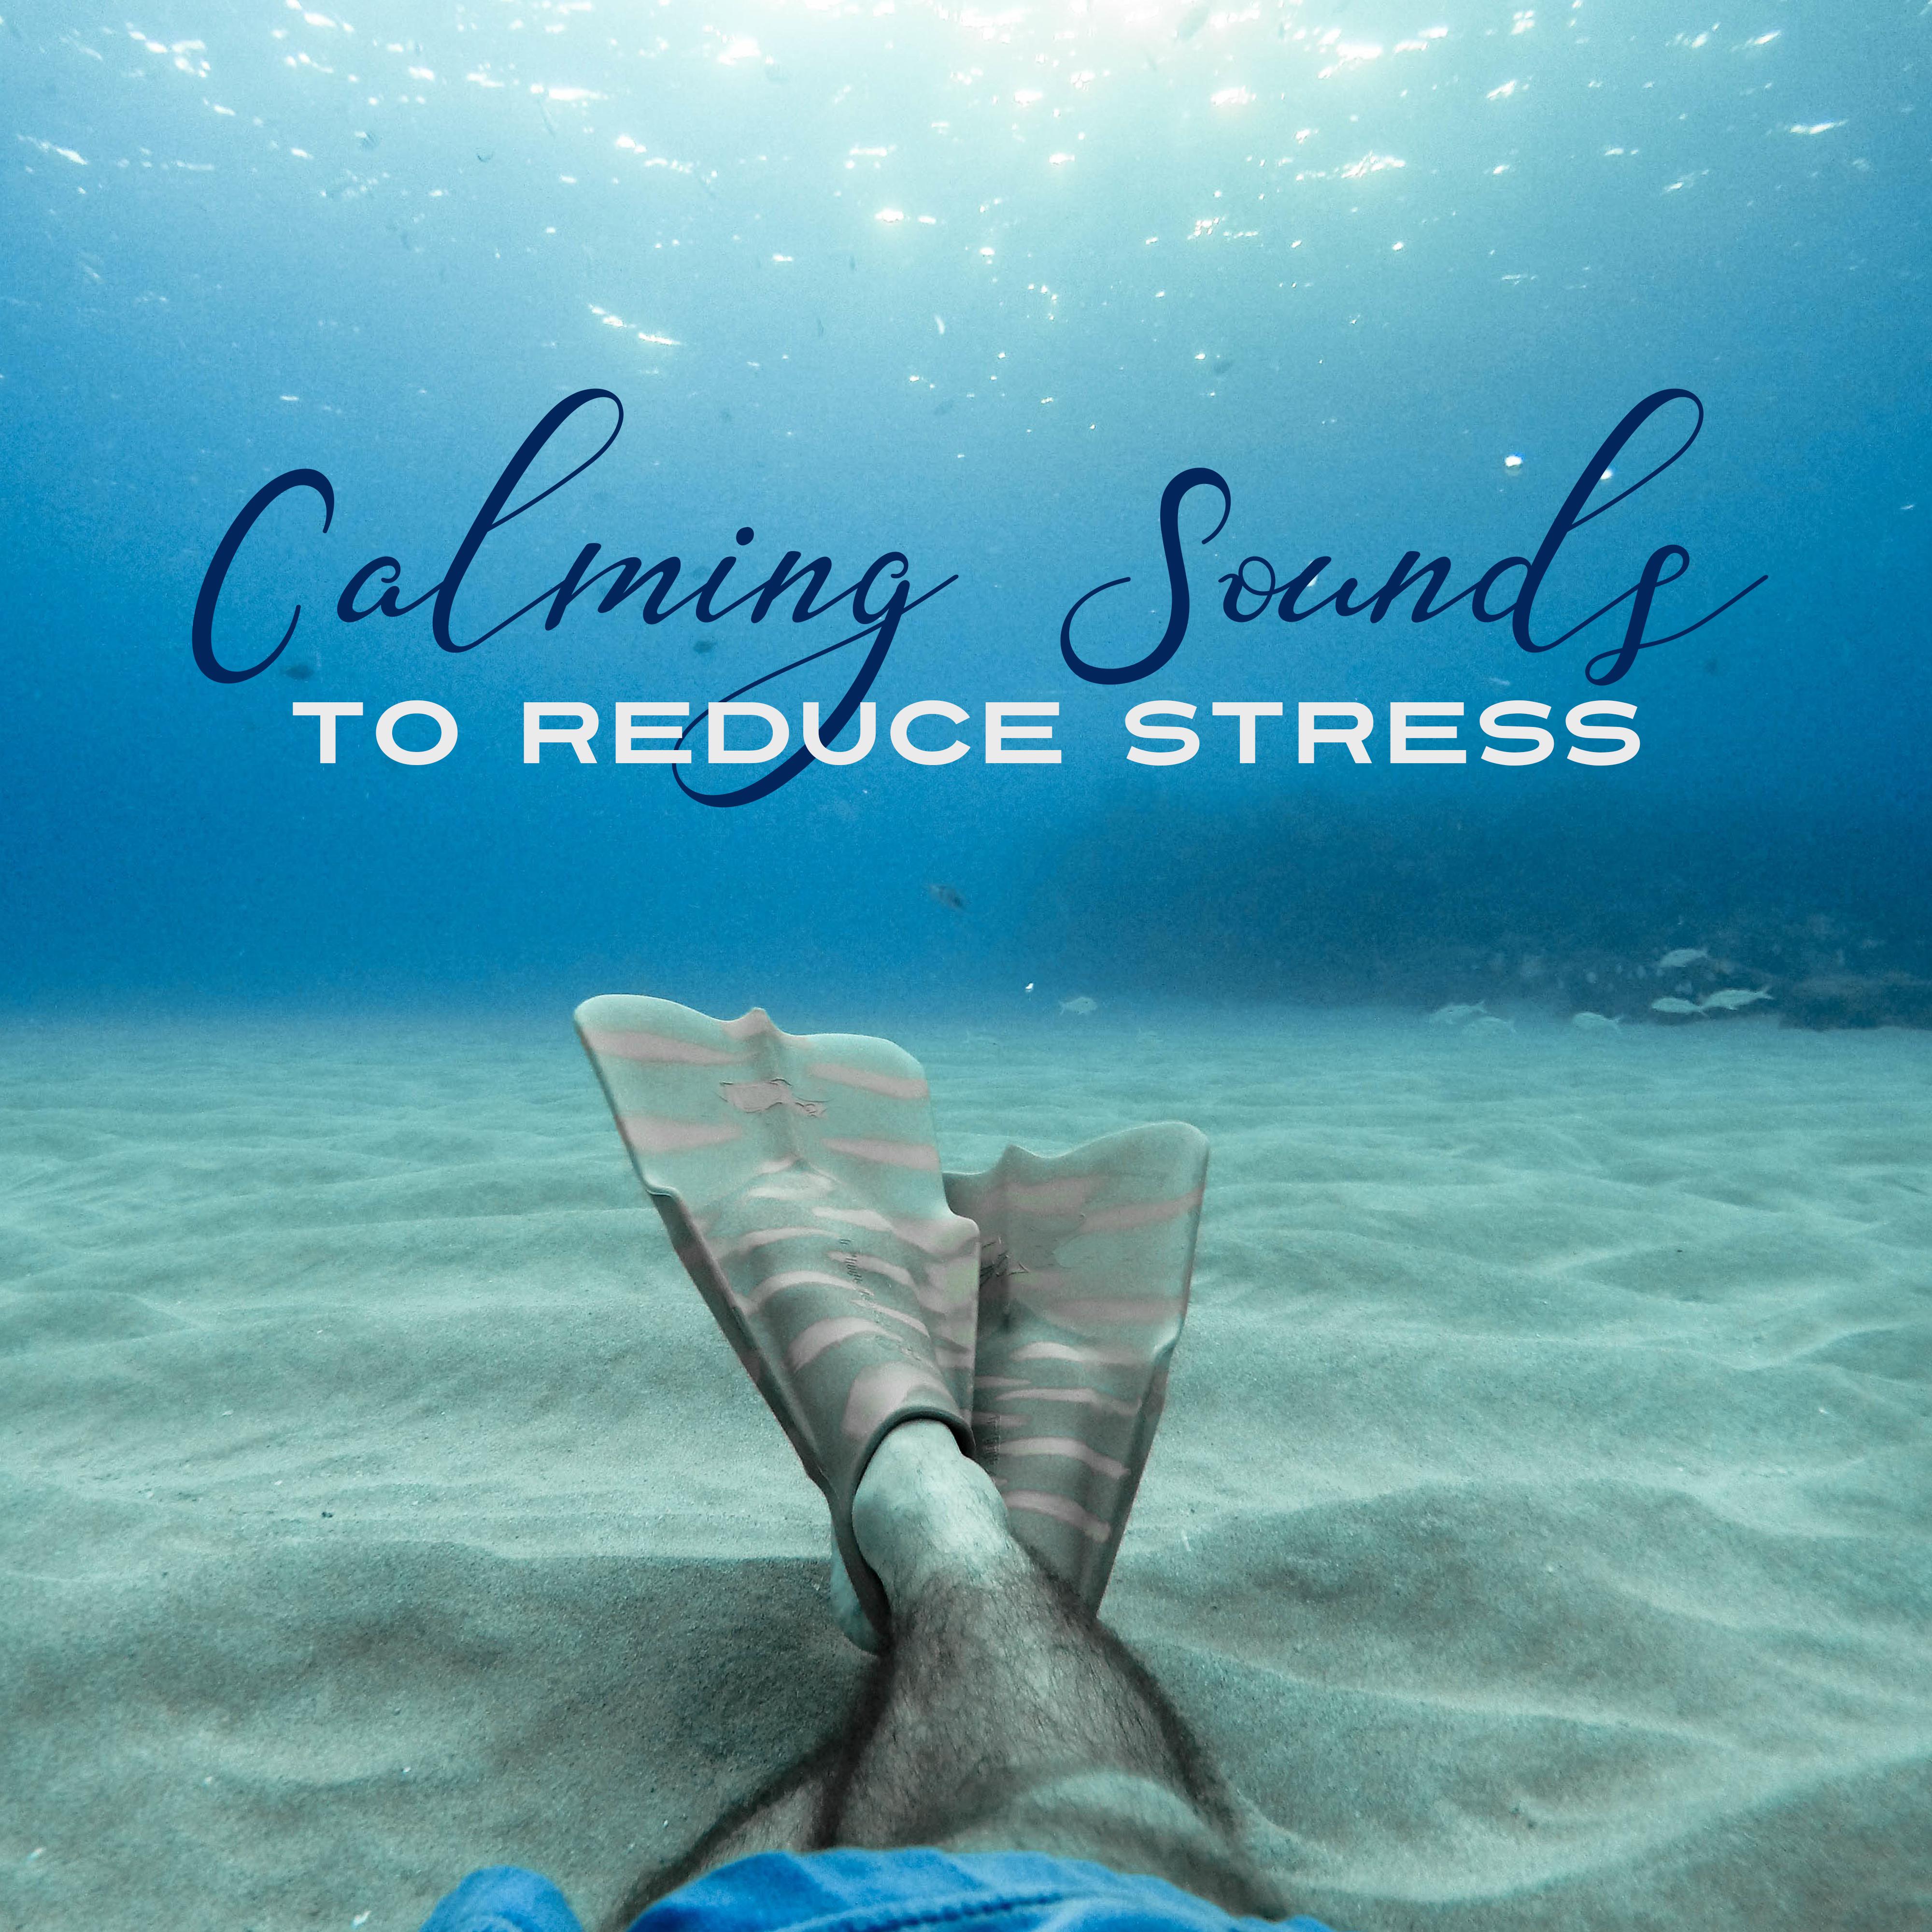 Calming Sounds to Reduce Stress  New Age Music, Free Your Mind, Rest a Bit, Brain Calmness